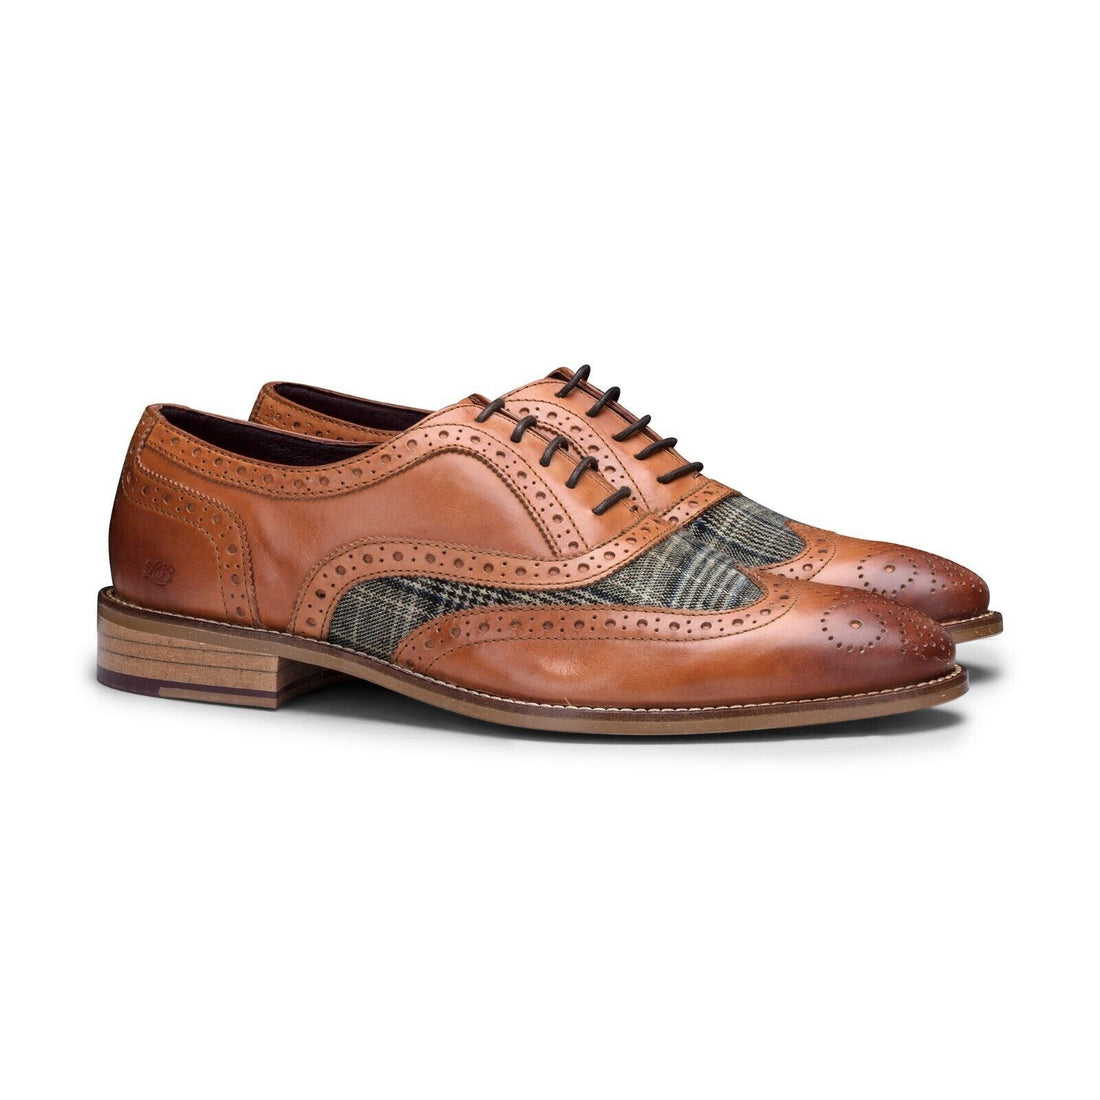 Mens Classic Oxford Tan Leather Gatsby Brogue Shoes with Tweed